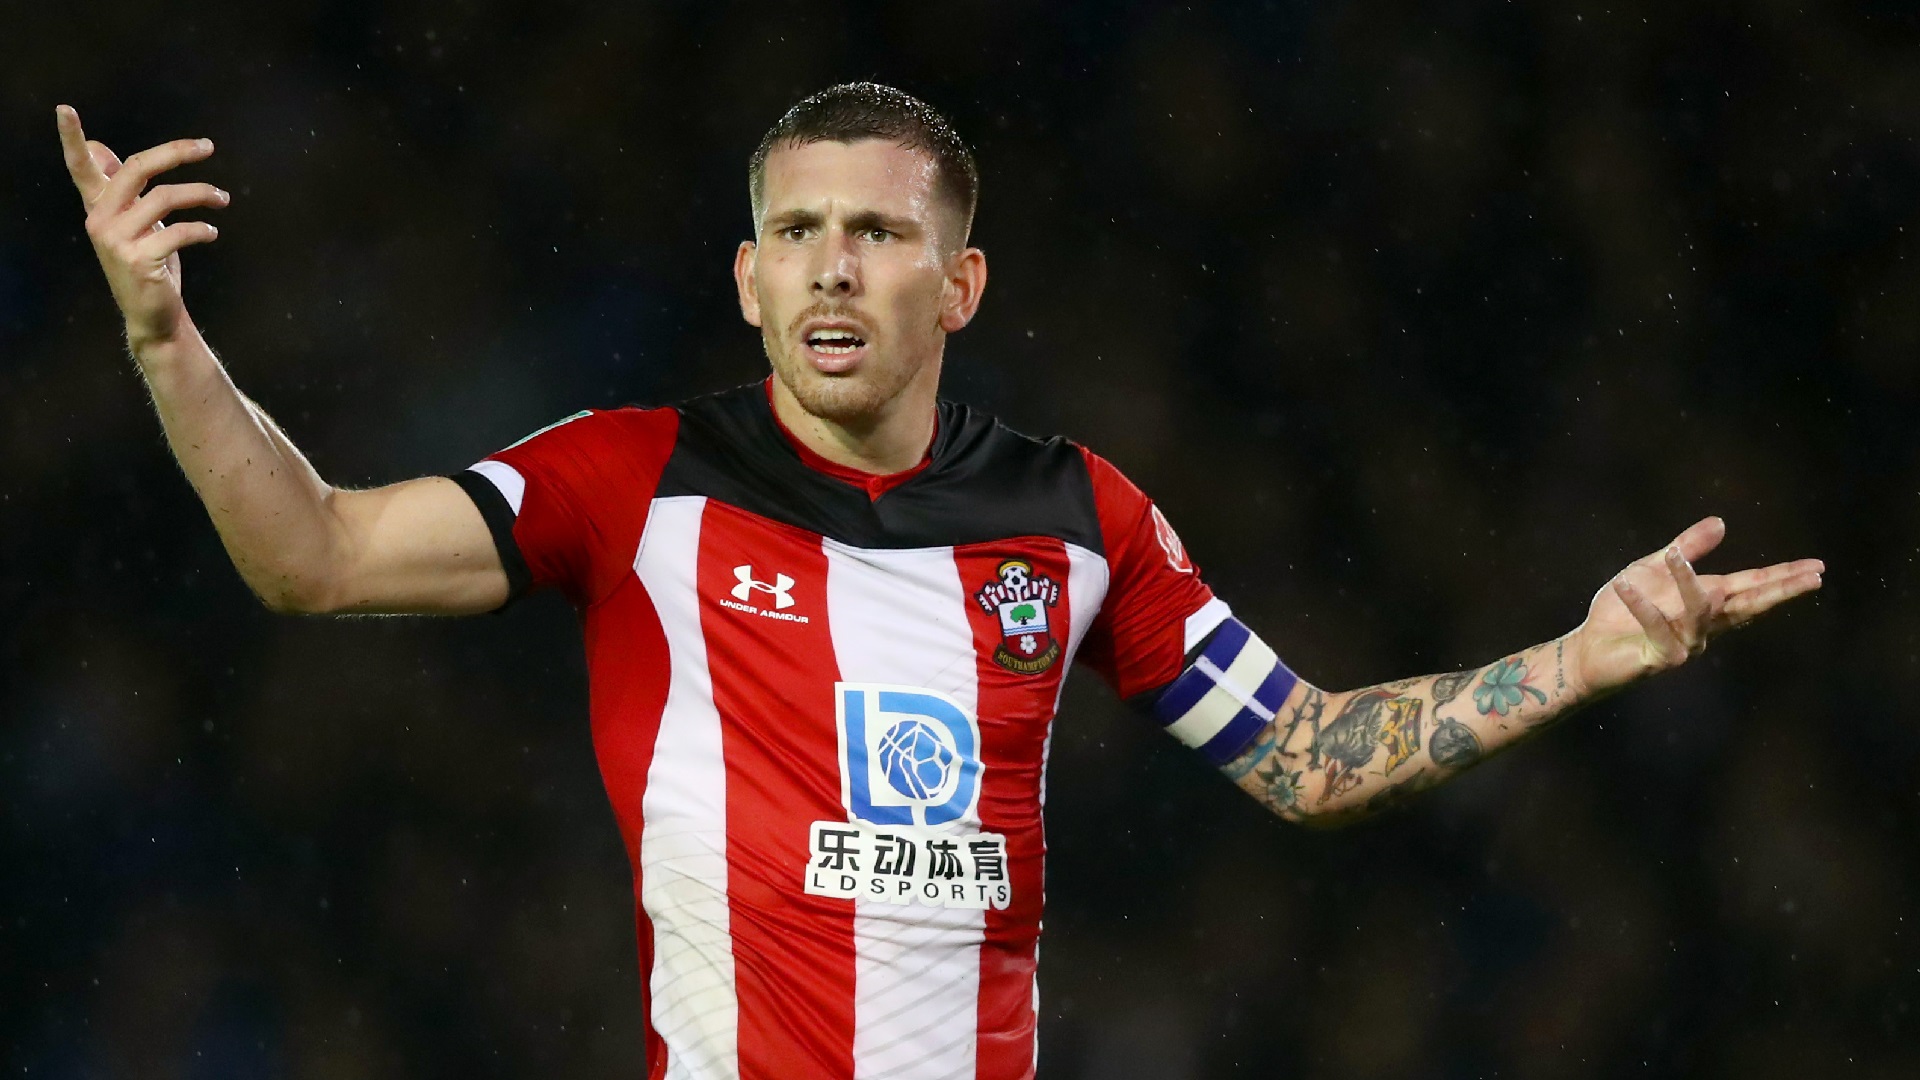 'Hojbjerg is a very good player, but will he make Spurs better?' - Bent in Mourinho transfer warning